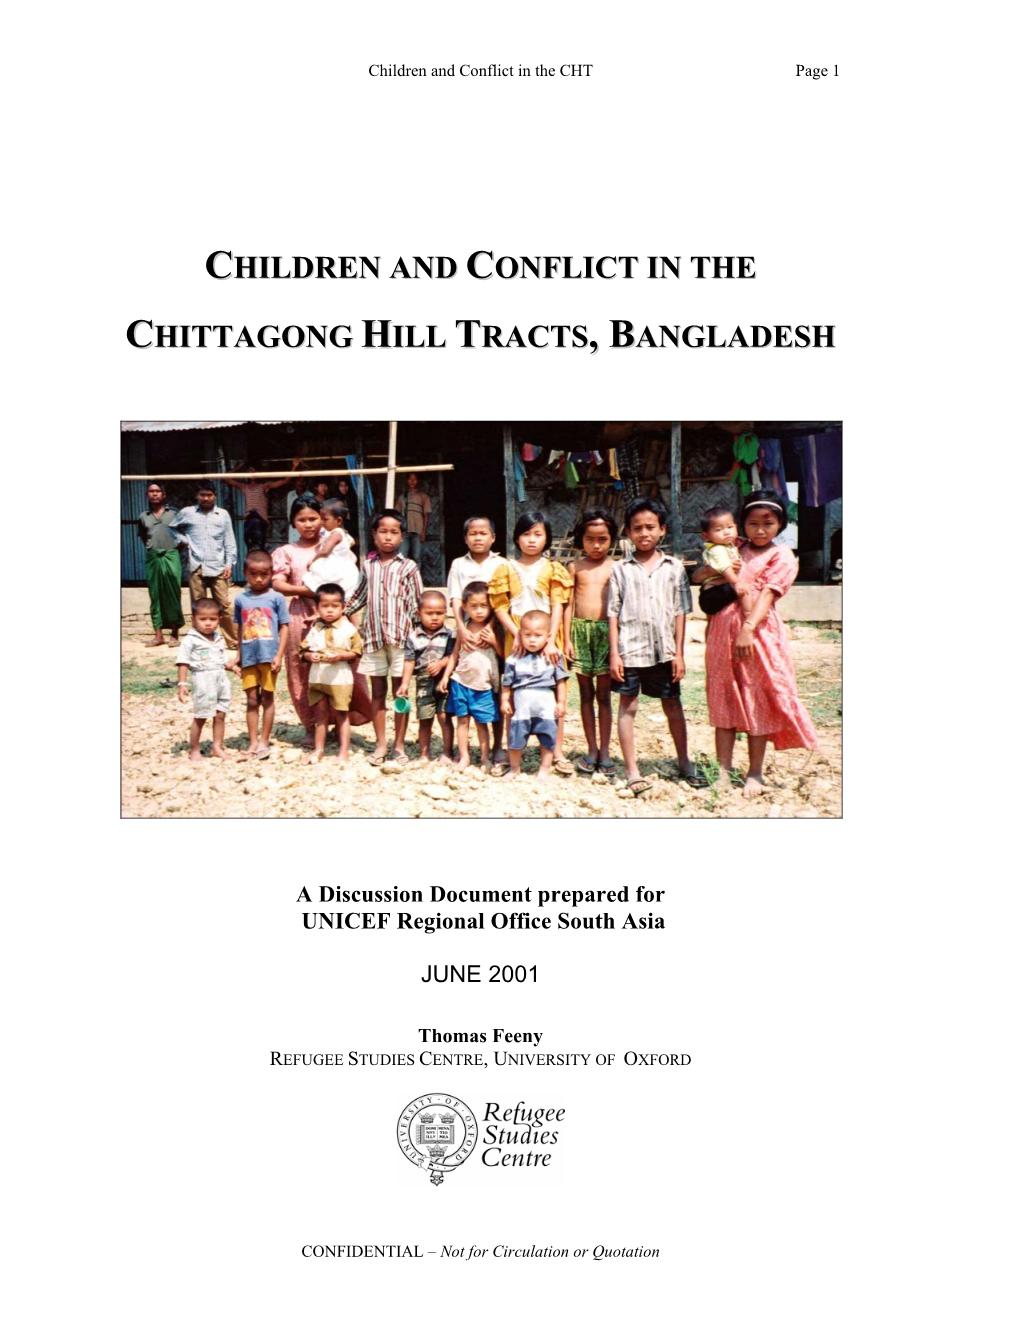 Children and Conflict in the Chittagong Hill Tracts, Bangladesh